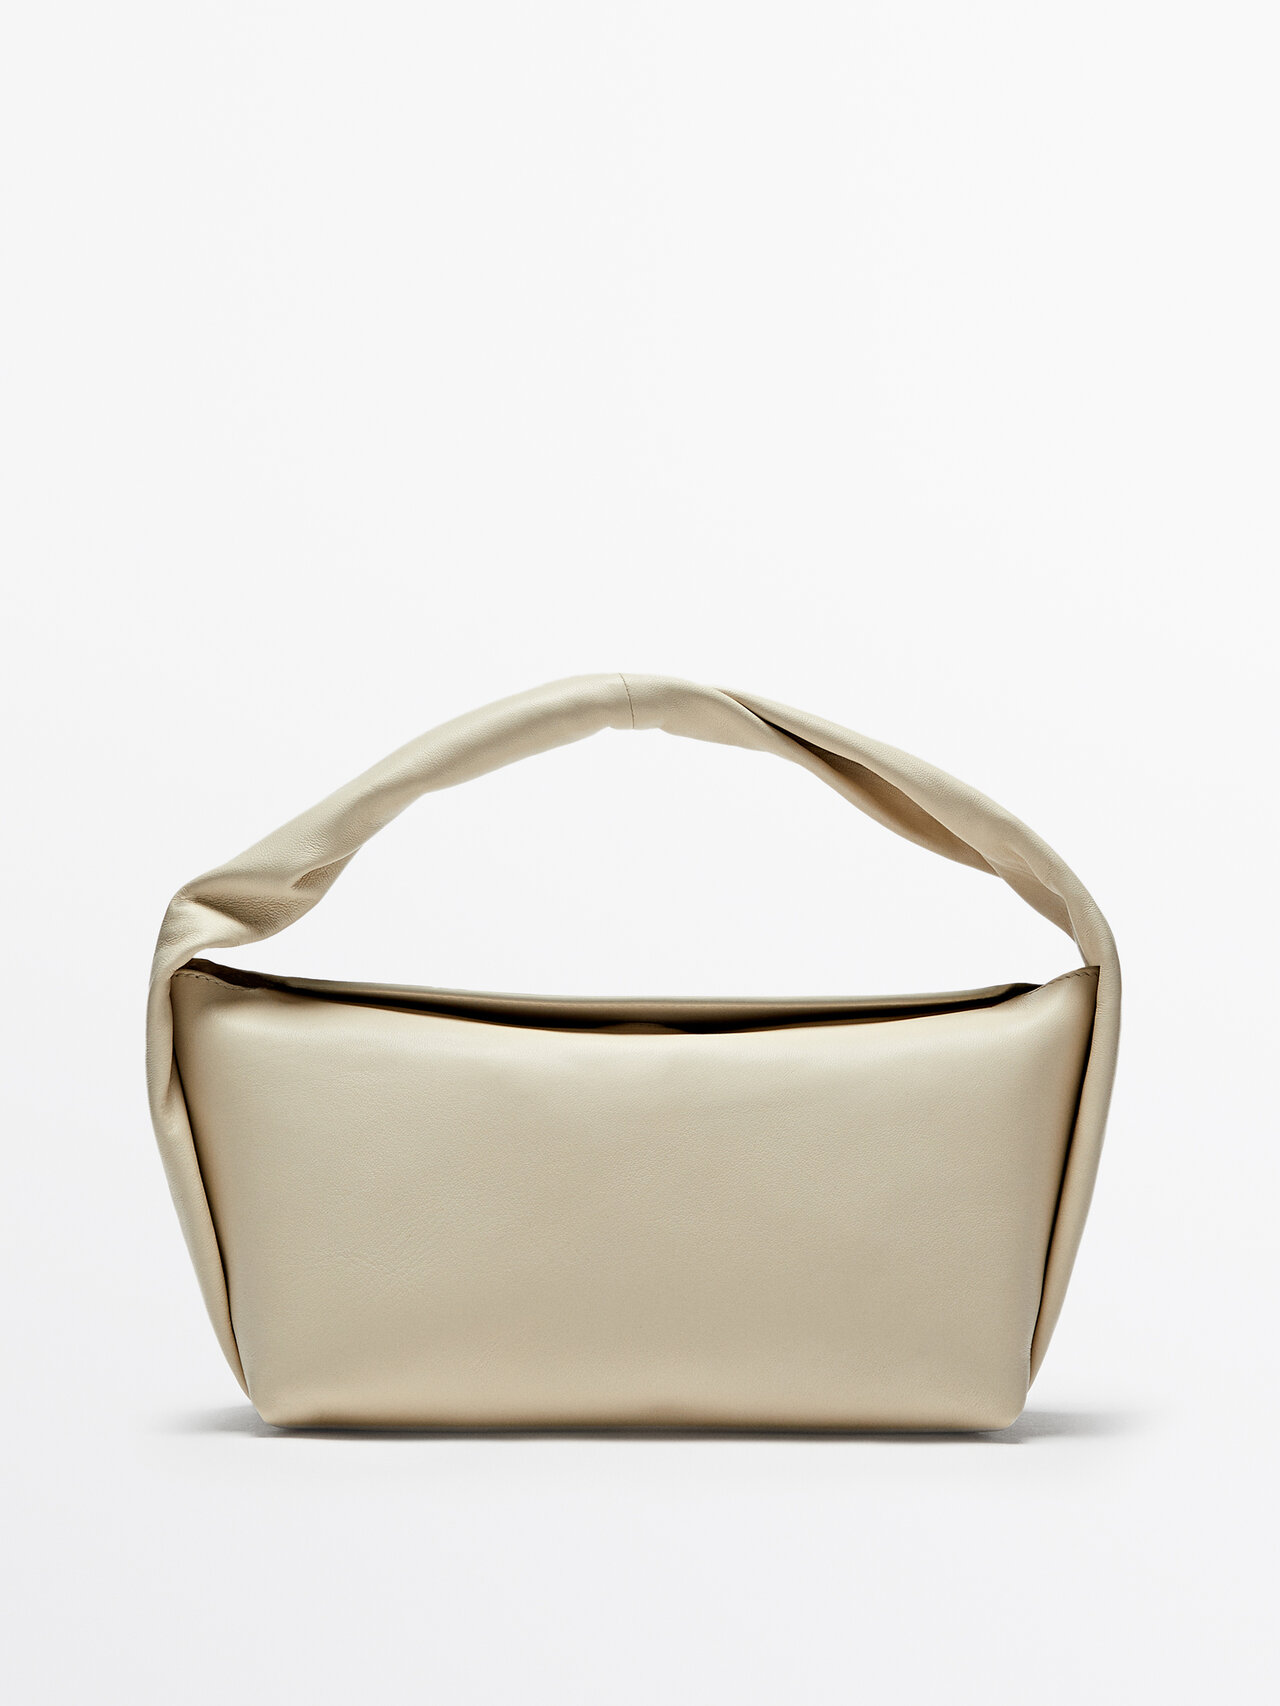 Massimo Dutti Nappa Leather Croissant Bag In Neutral